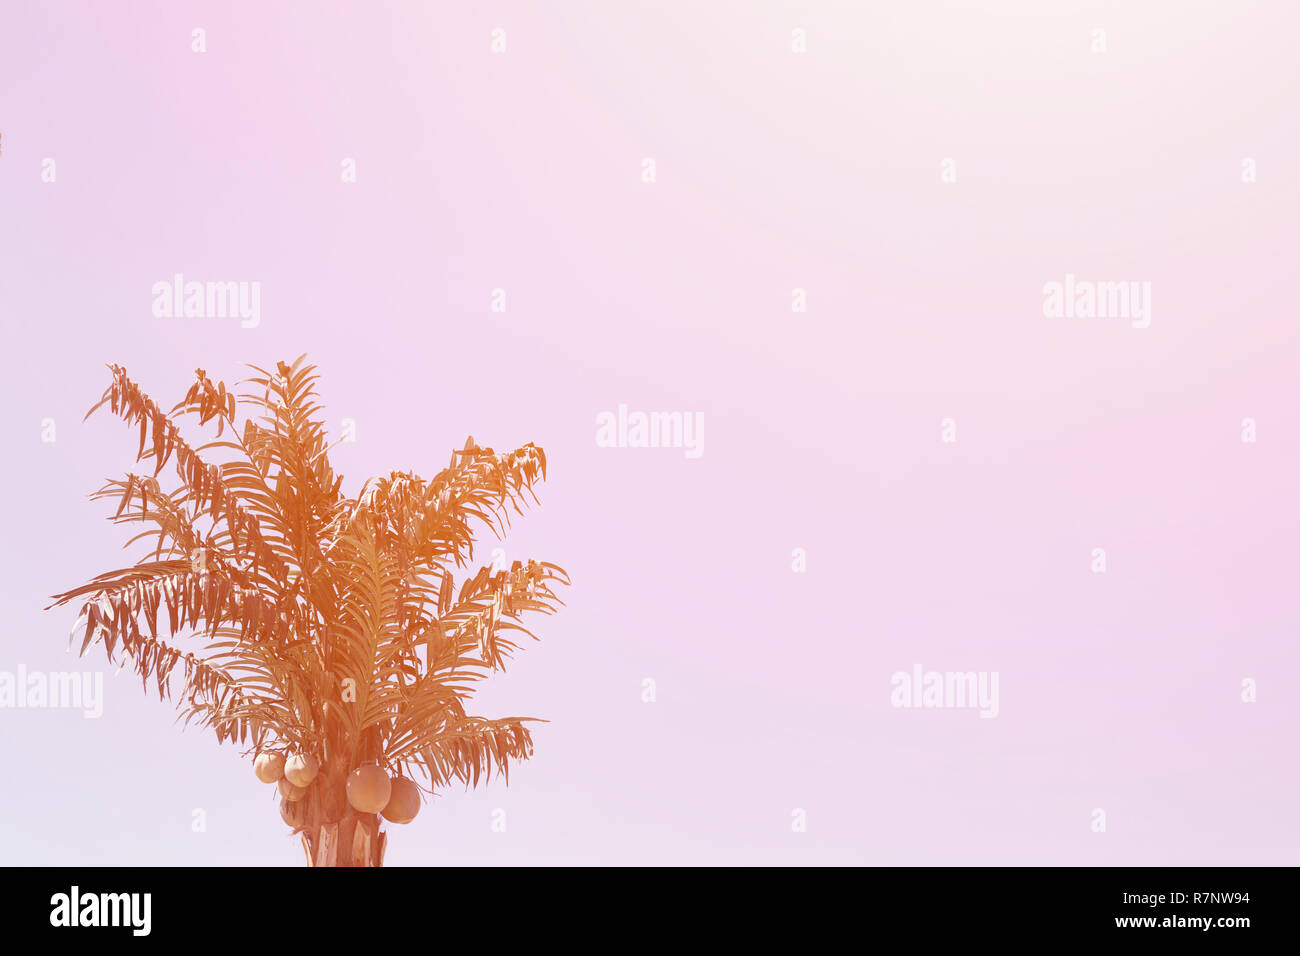 Tropical palm tree background image. Image with copy space for text. Toned image Stock Photo